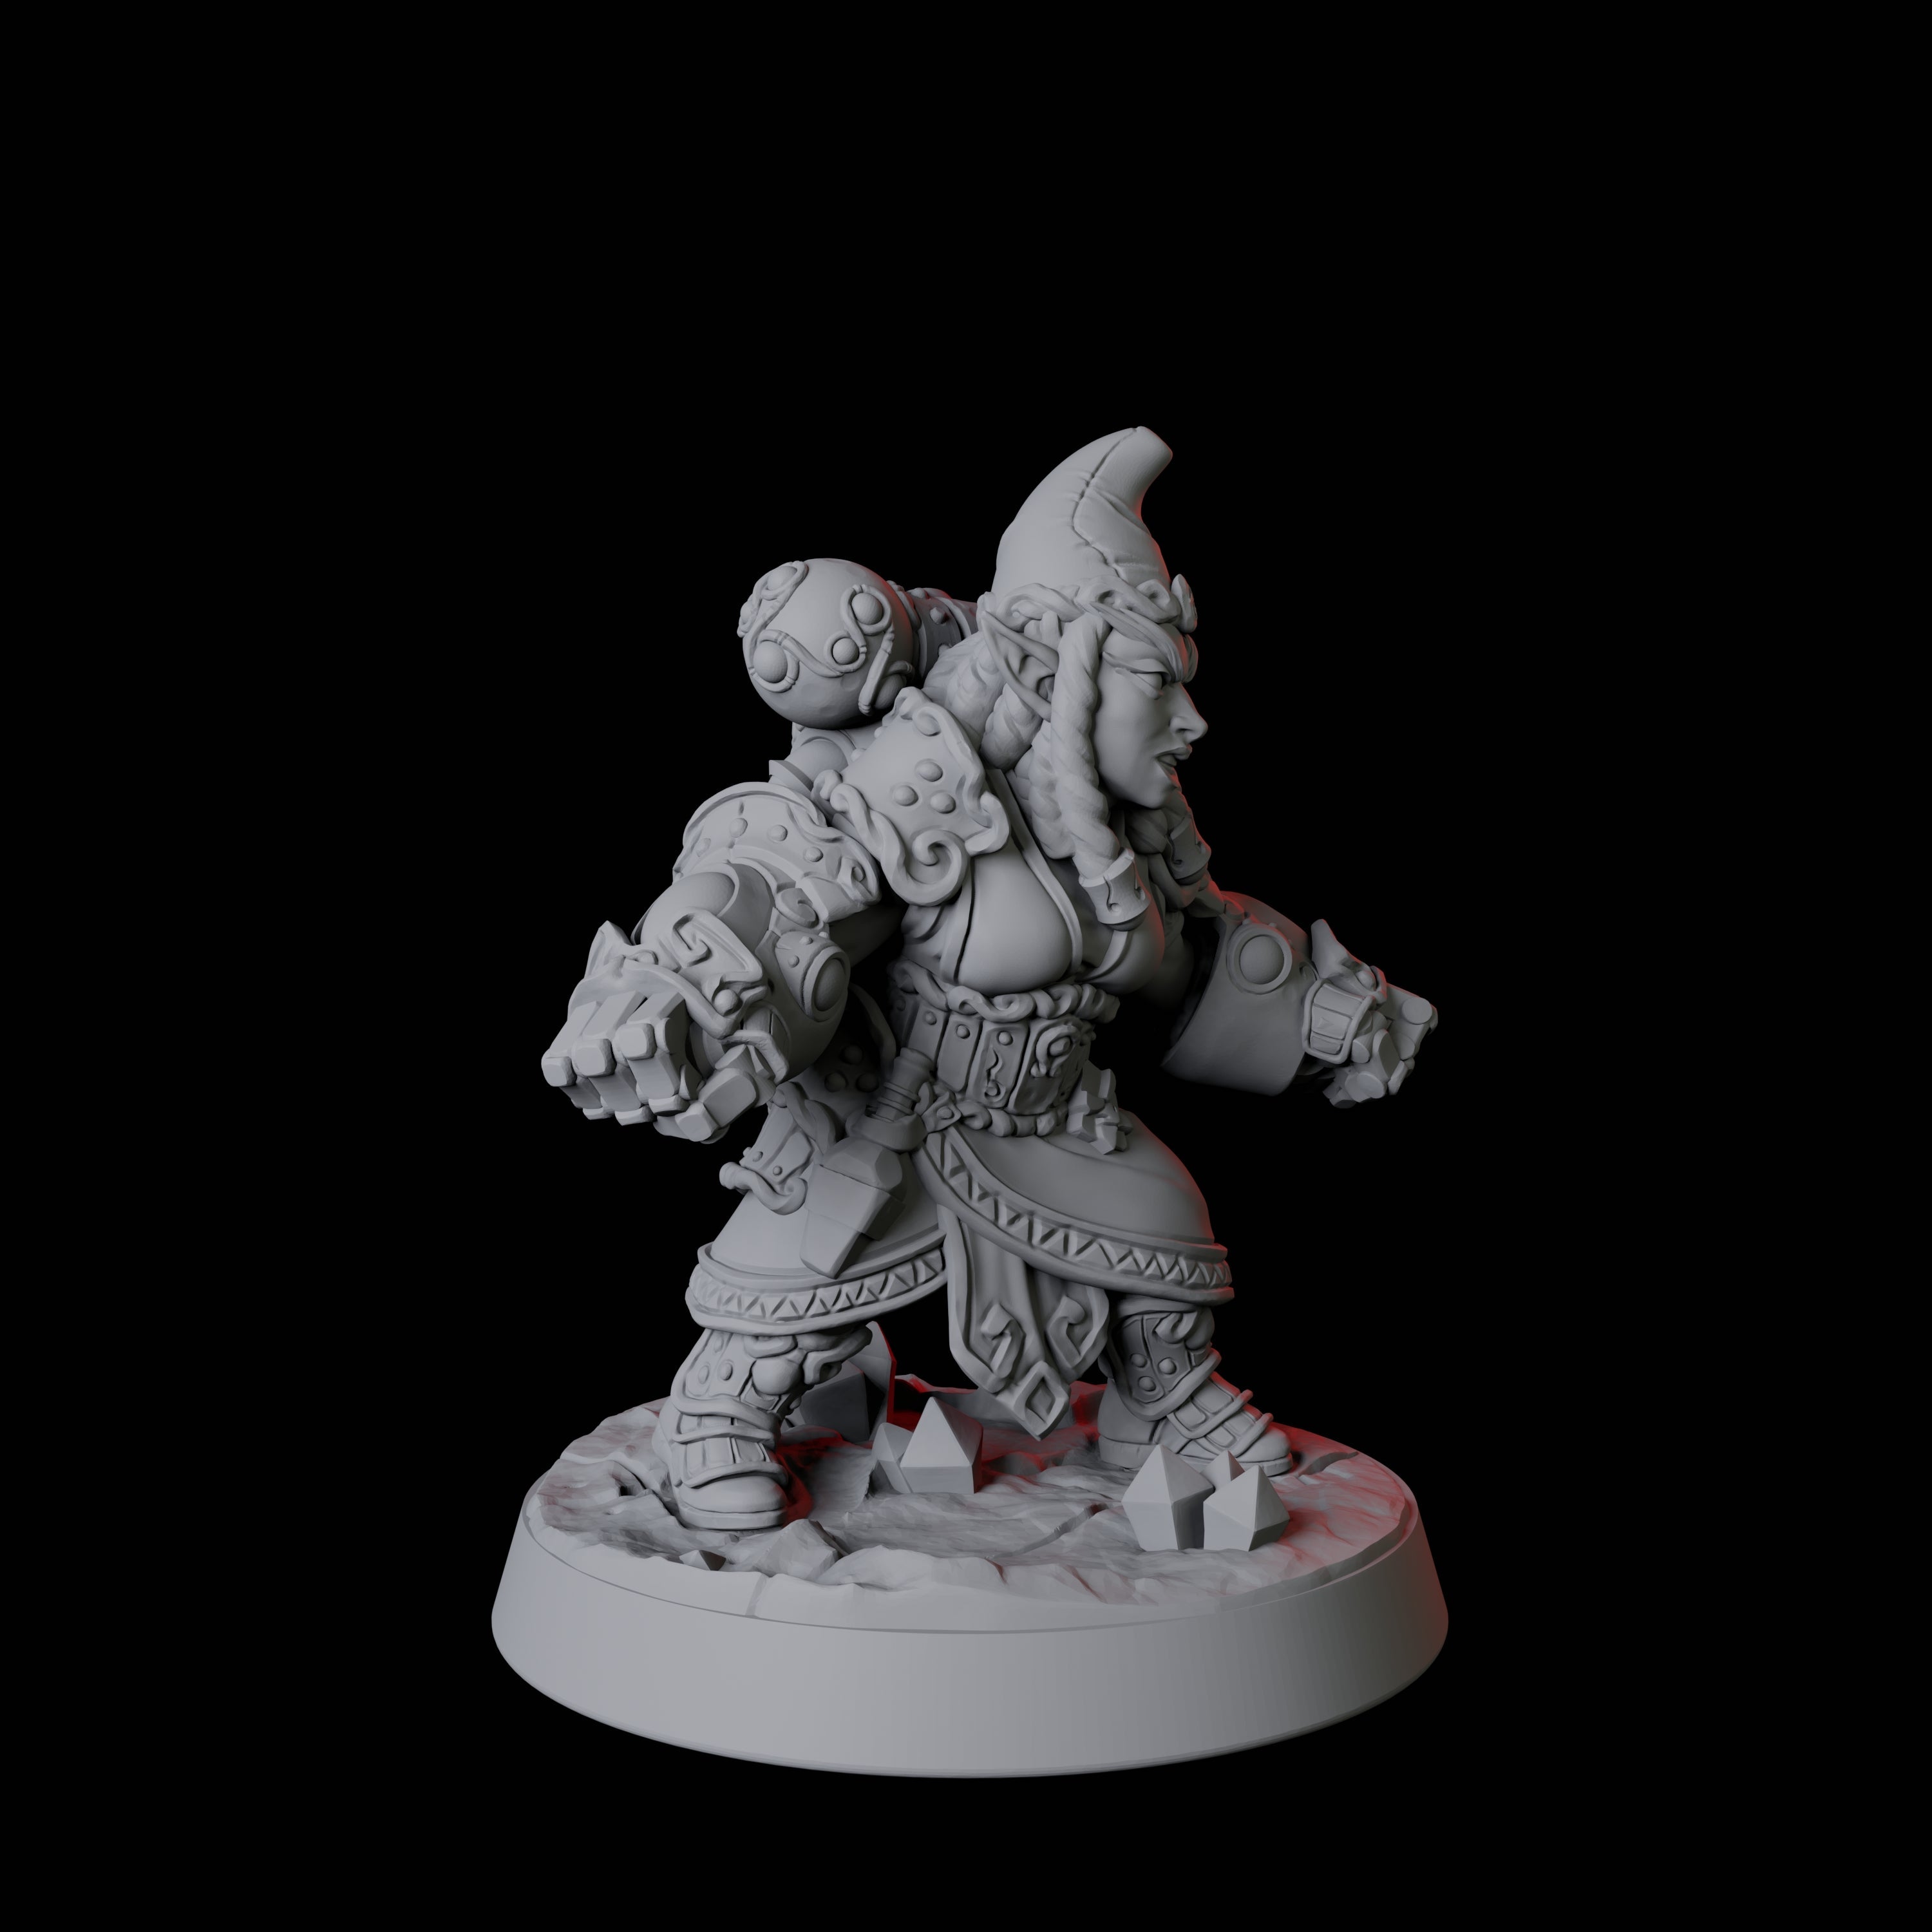 Deep Gnome Artificer F Miniature for Dungeons and Dragons, Pathfinder or other TTRPGs